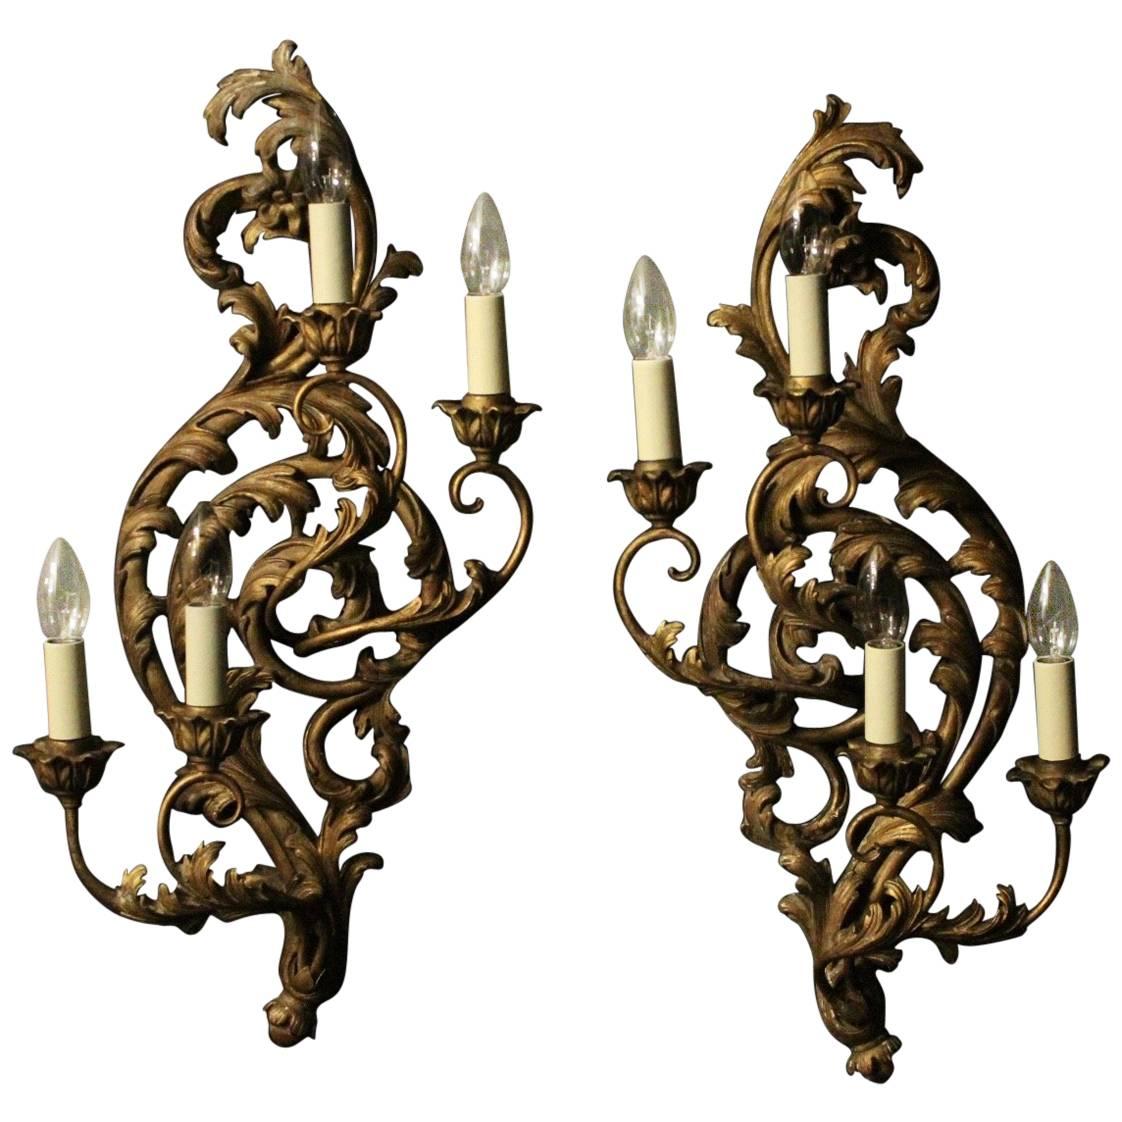 Florentine Pair of Four-Arm Silver Gilded Wall Lights